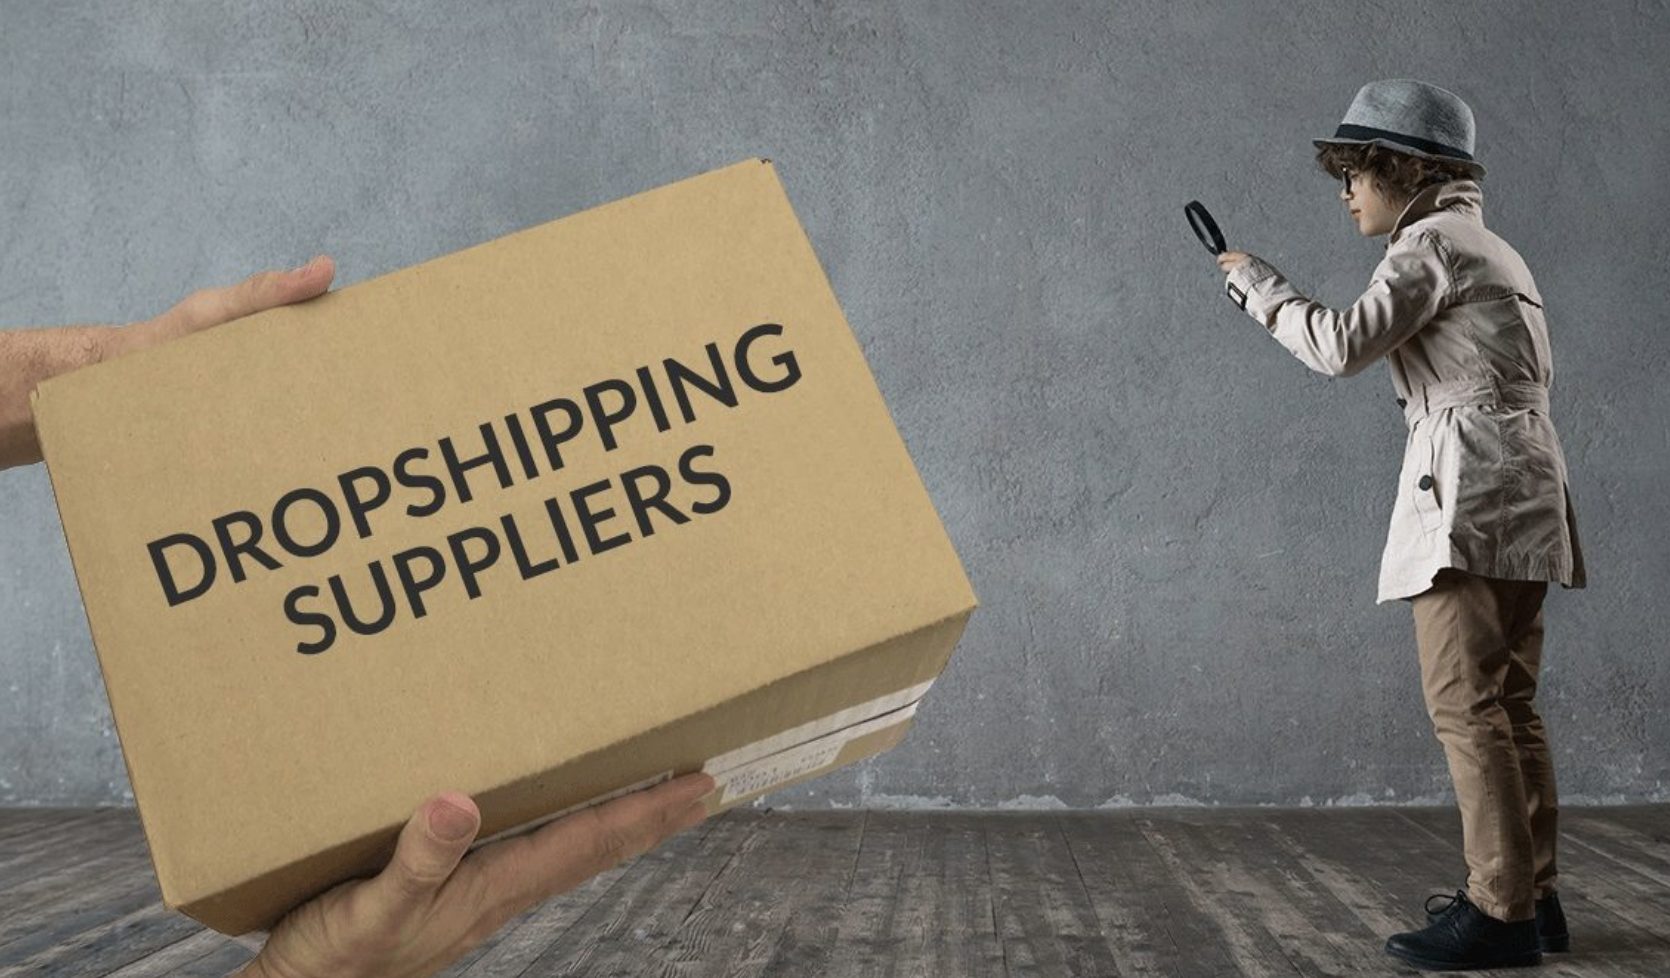 Reliable Dropshipping Supplier